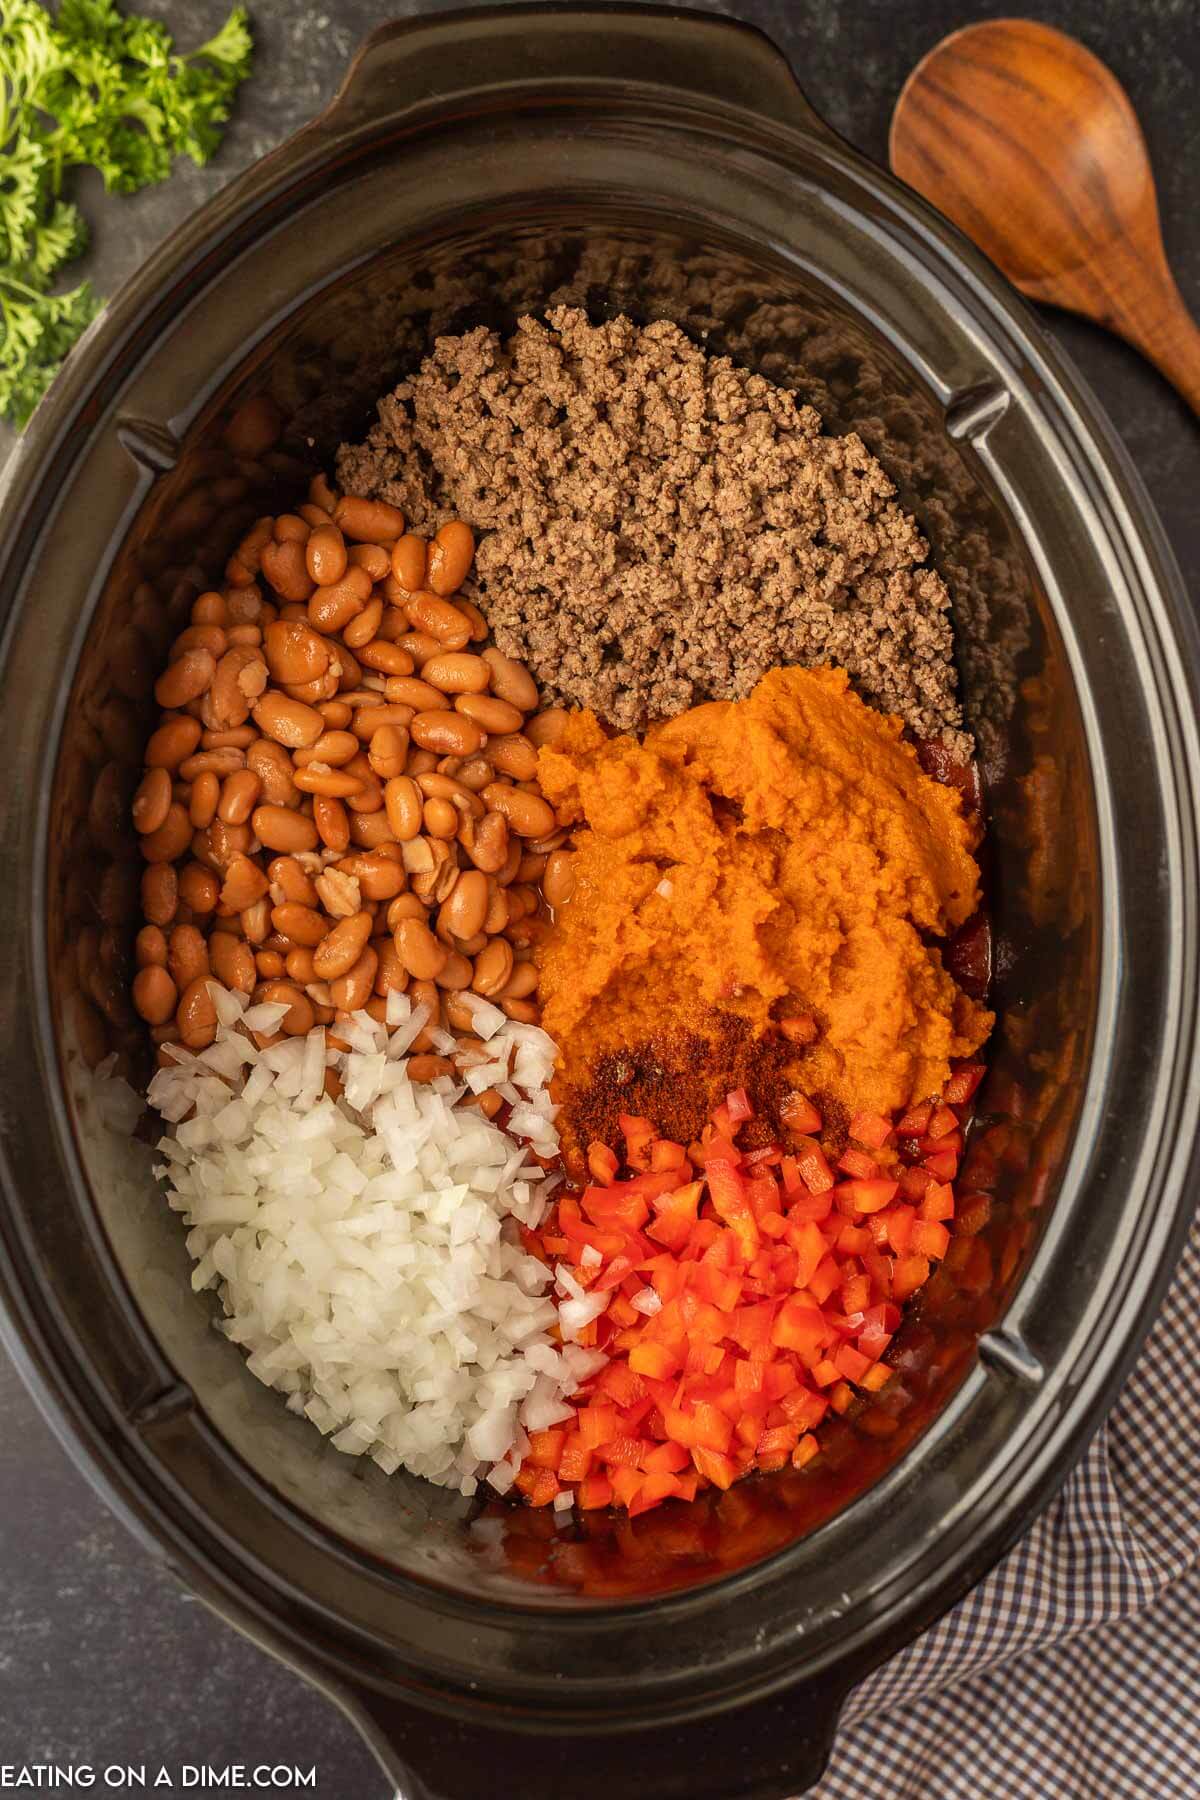 Adding the ingredients into the slow cooker